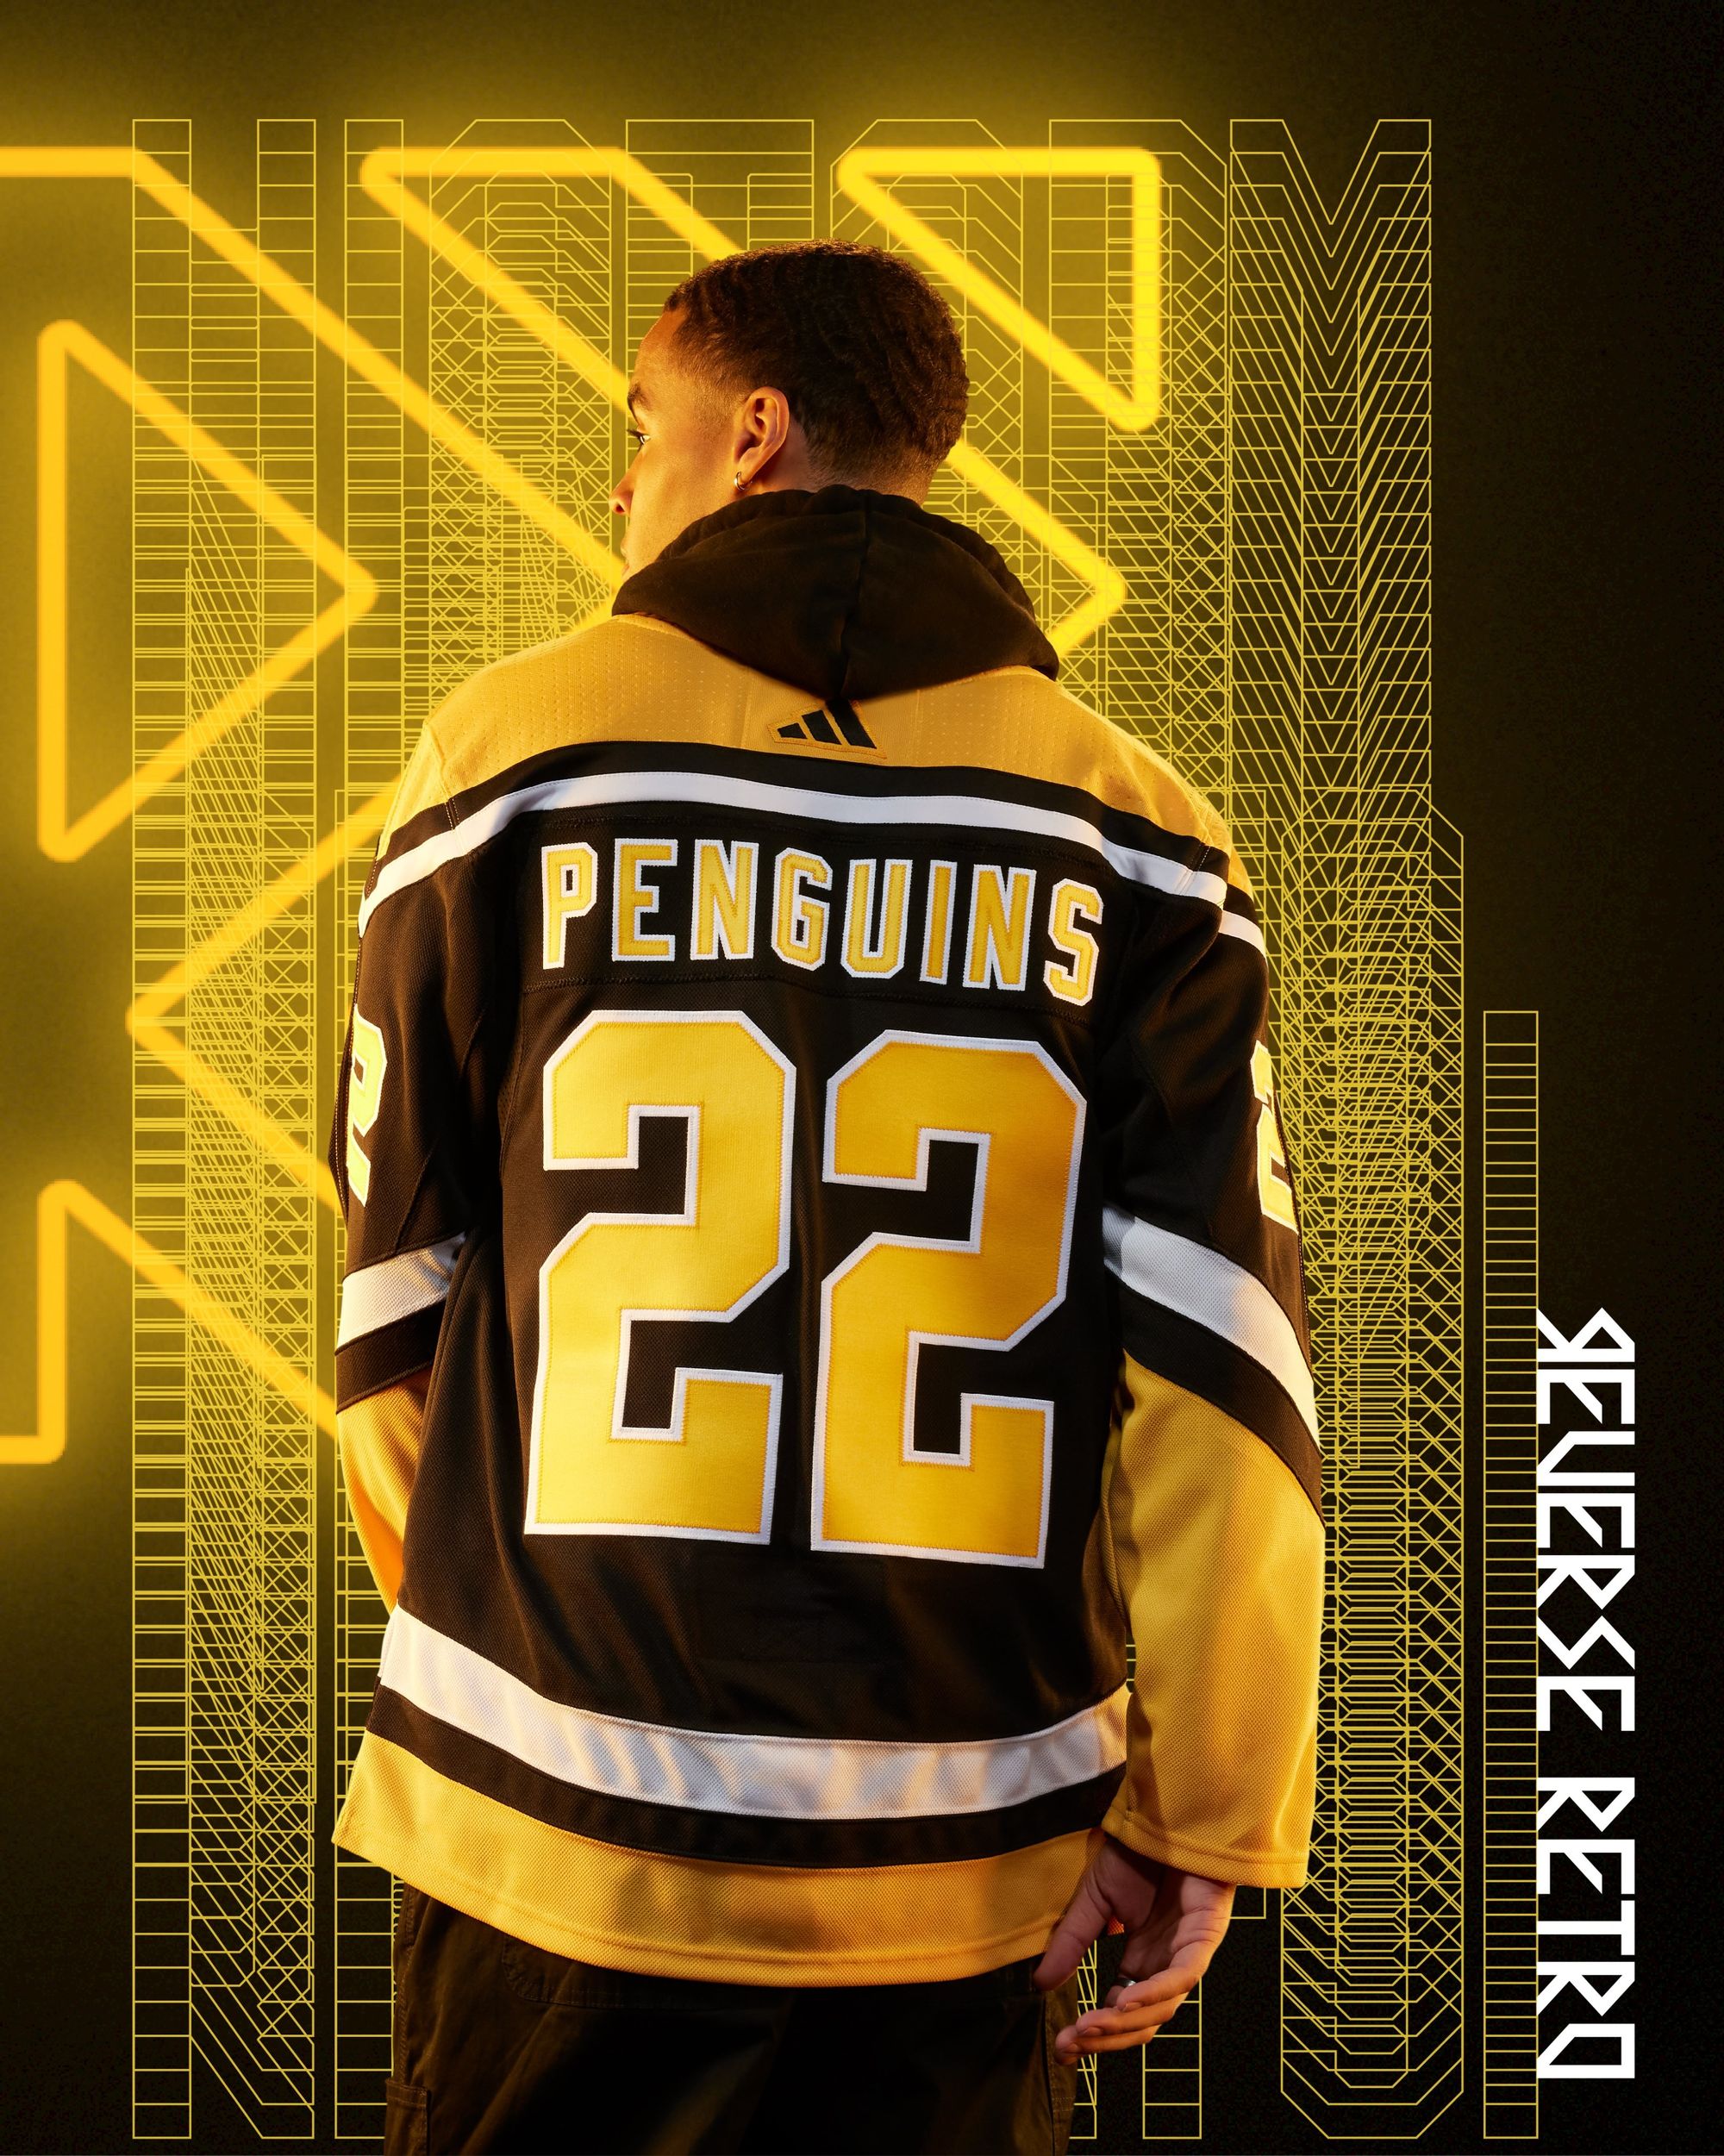 Is Robo-Penguins Logo Coming Back on Retro Jersey?